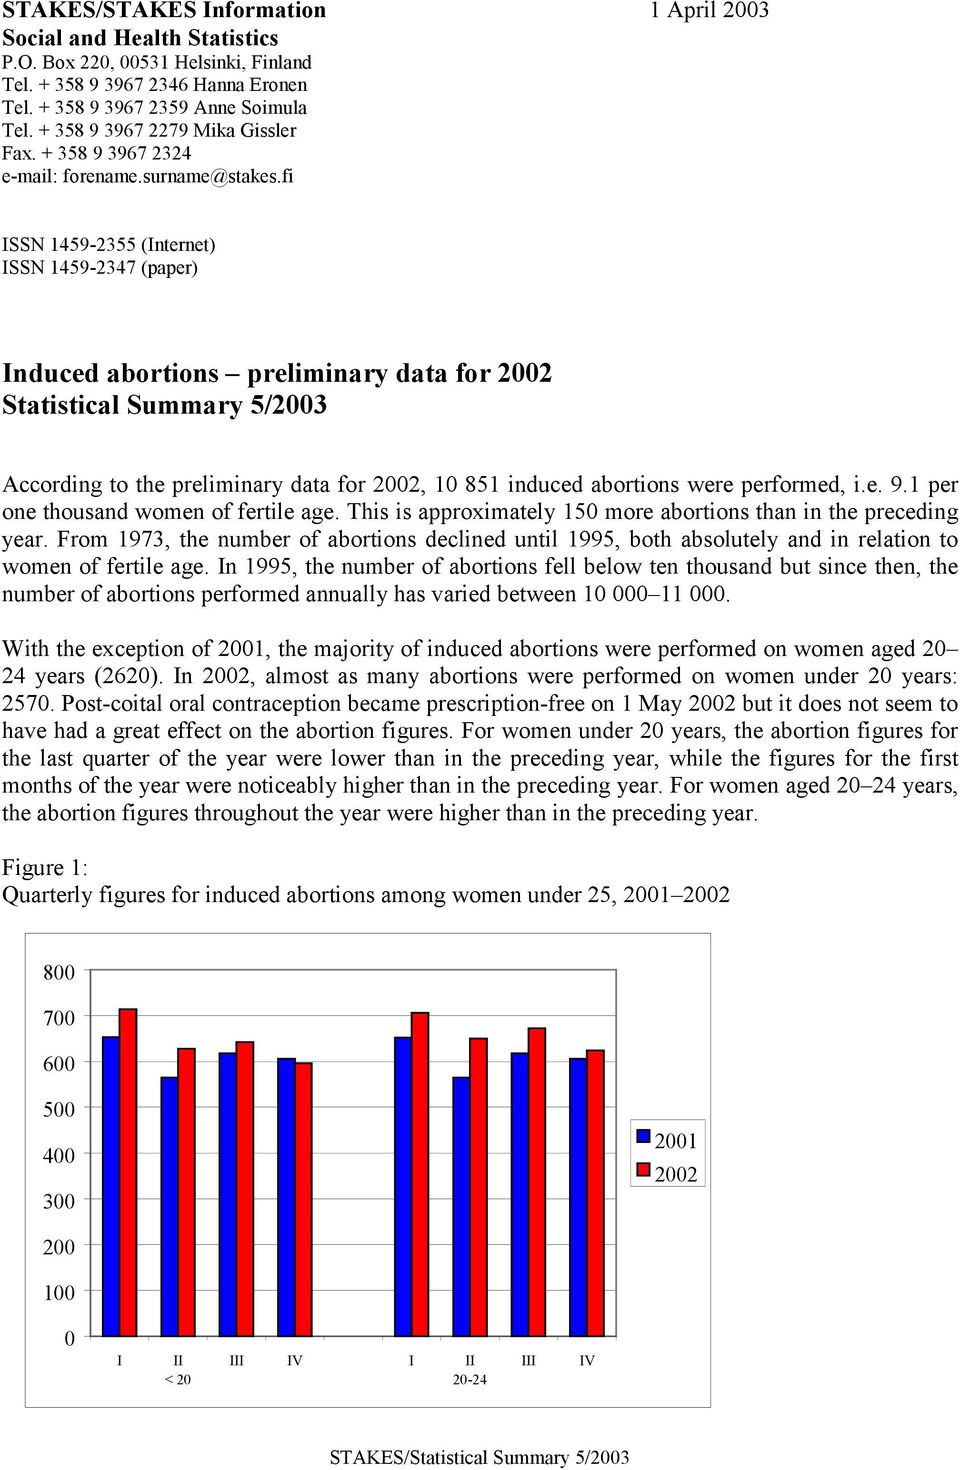 fi ISSN 1459-2355 (Internet) ISSN 1459-2347 (paper) Induced abortions preliminary data for 2002 Statistical Summary 5/2003 According to the preliminary data for 2002, 10 851 induced abortions were